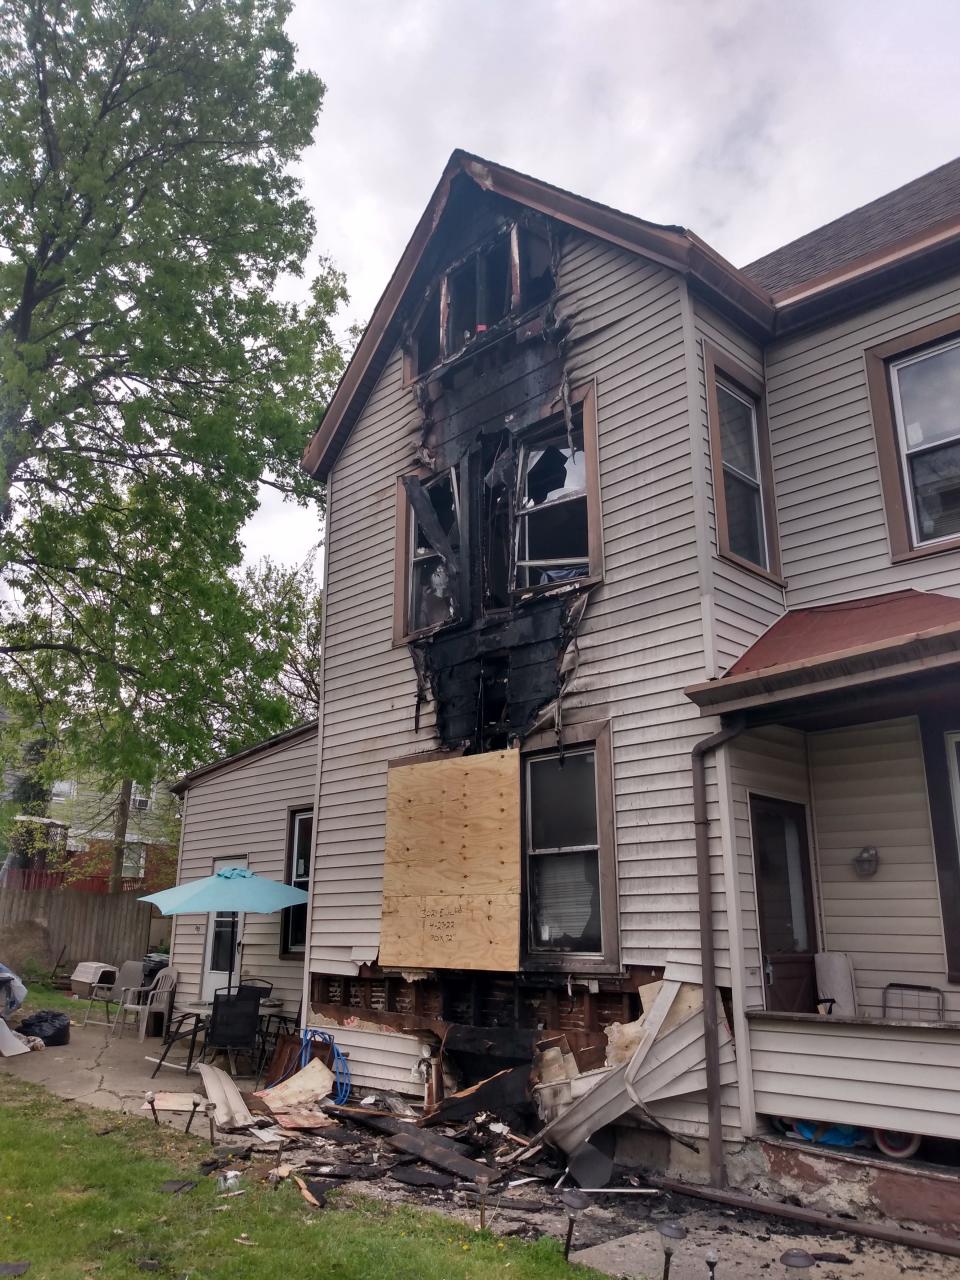 The fire damage to the Cincinnati house where a woman, child and dog were rescued.